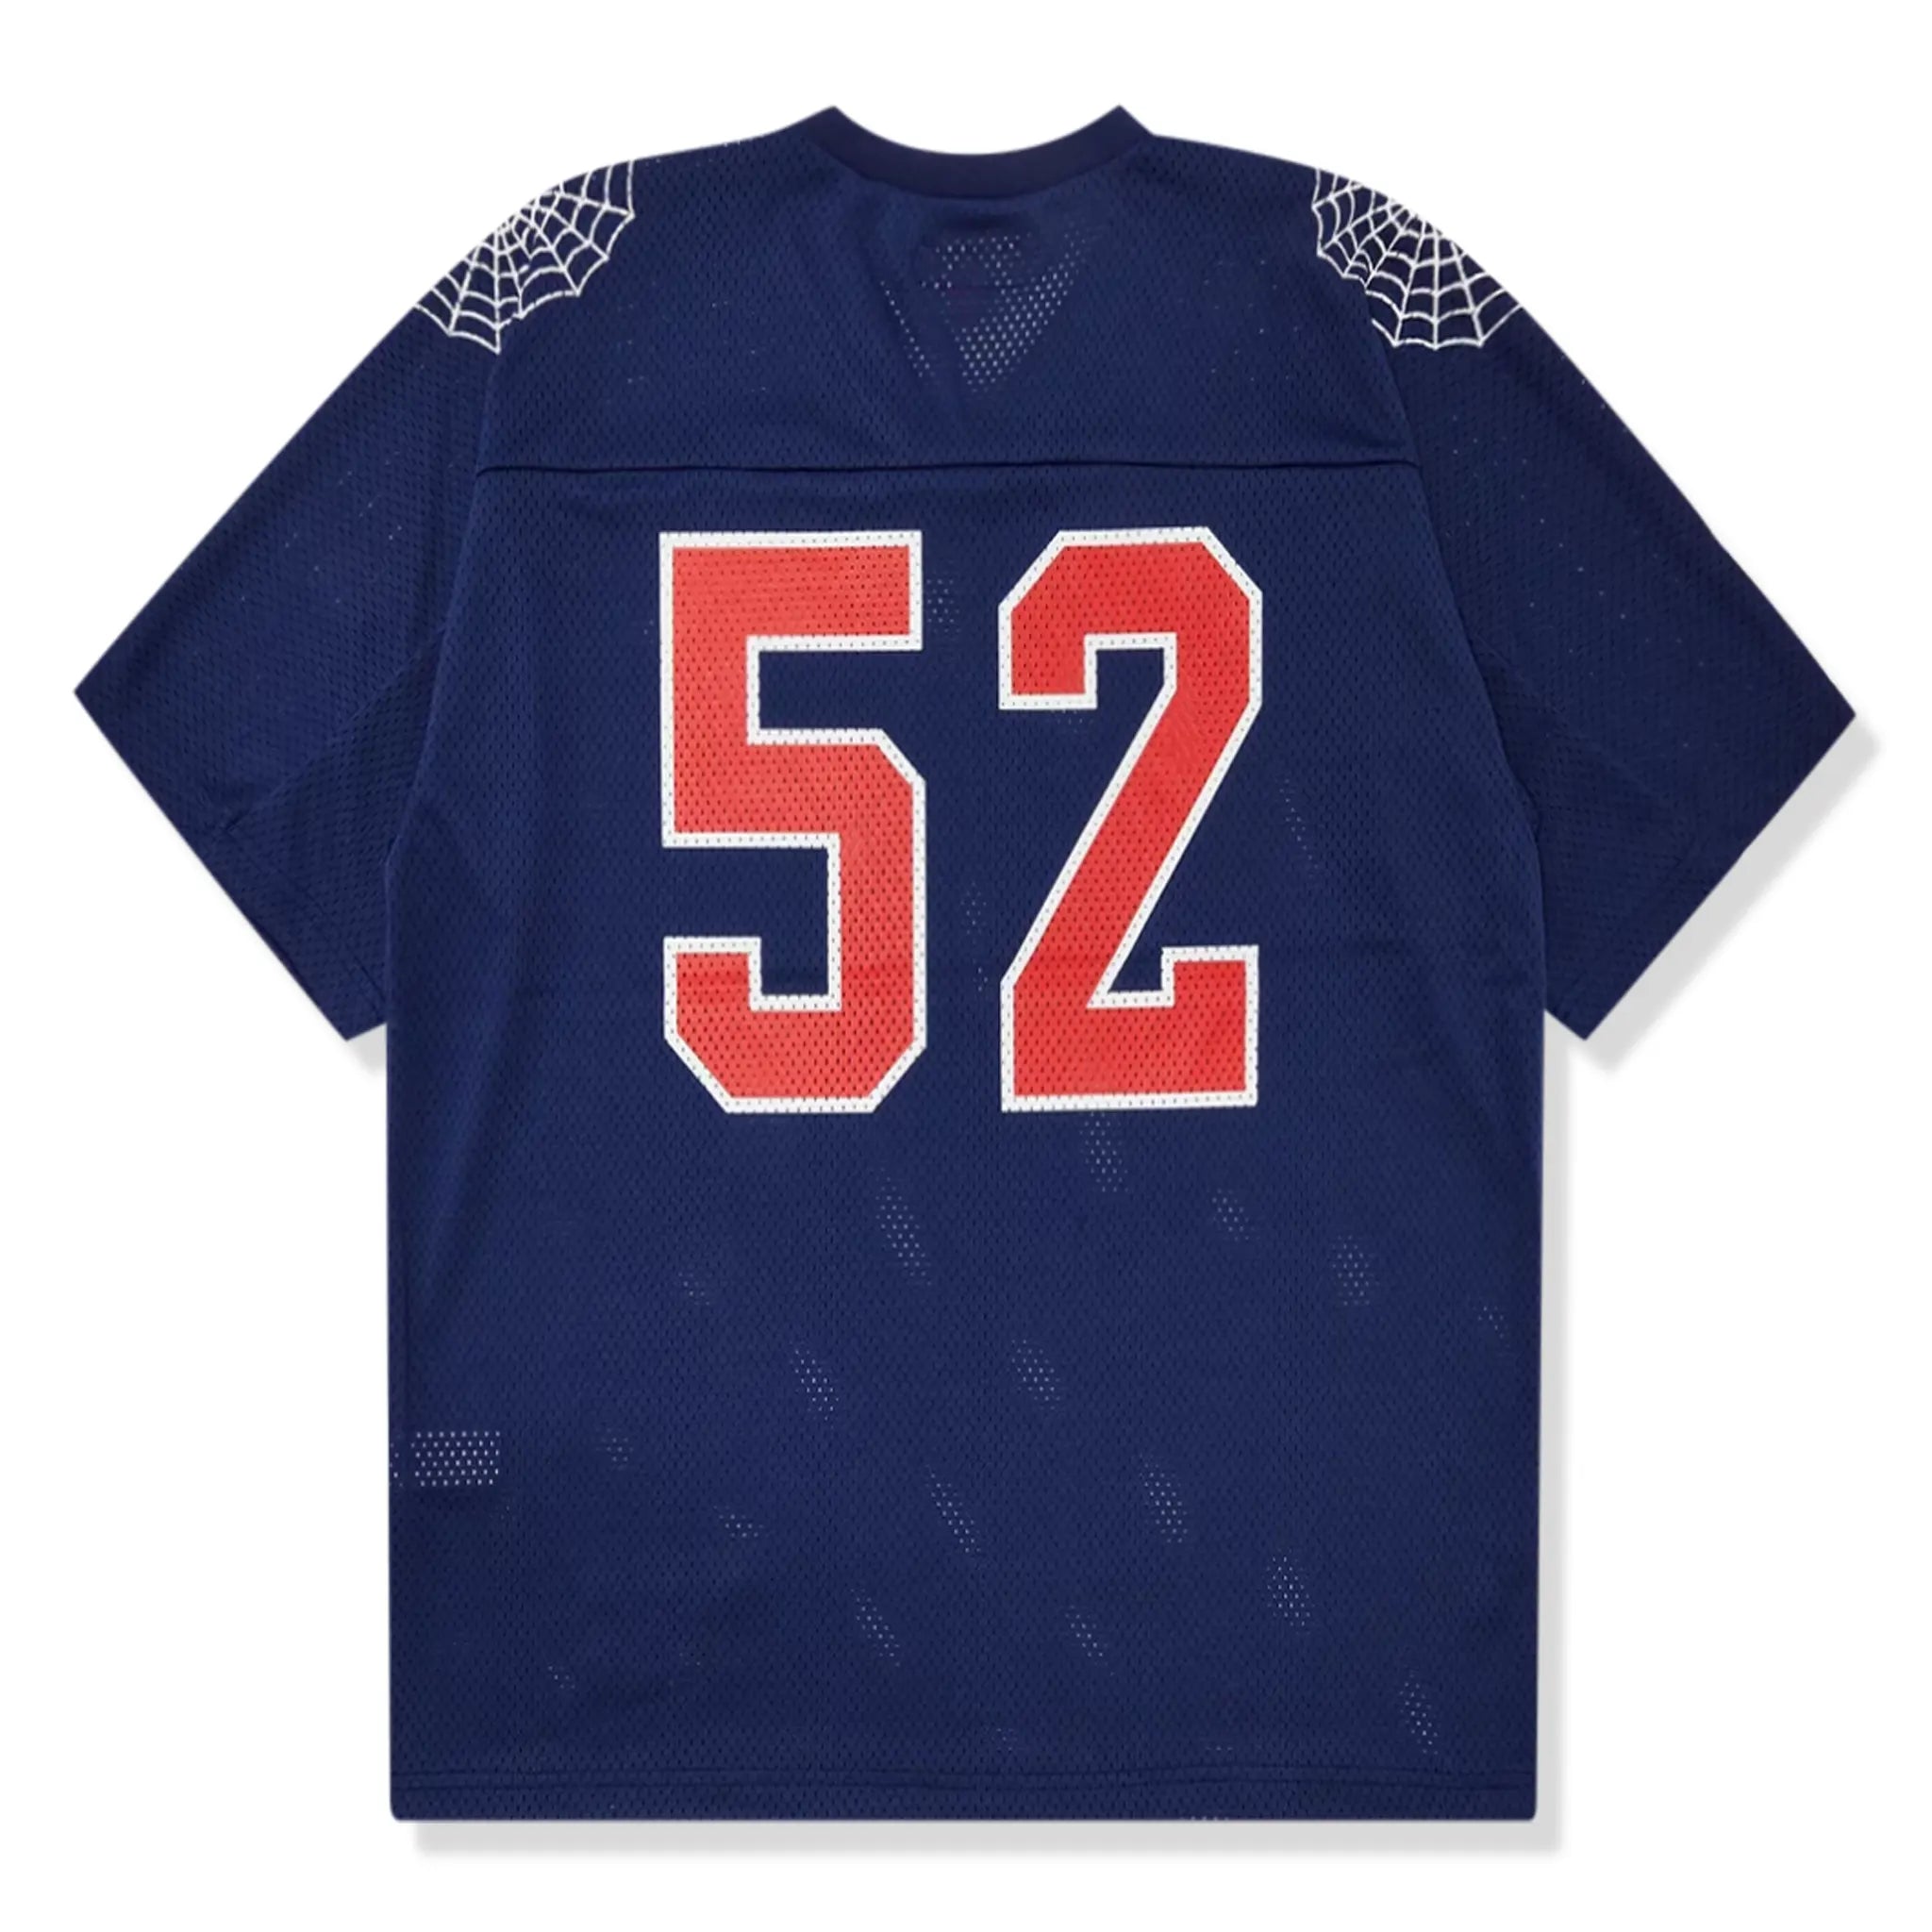 Back view of Supreme Spiderweb Navy Blue Football Jersey SS24KN63 NAVY